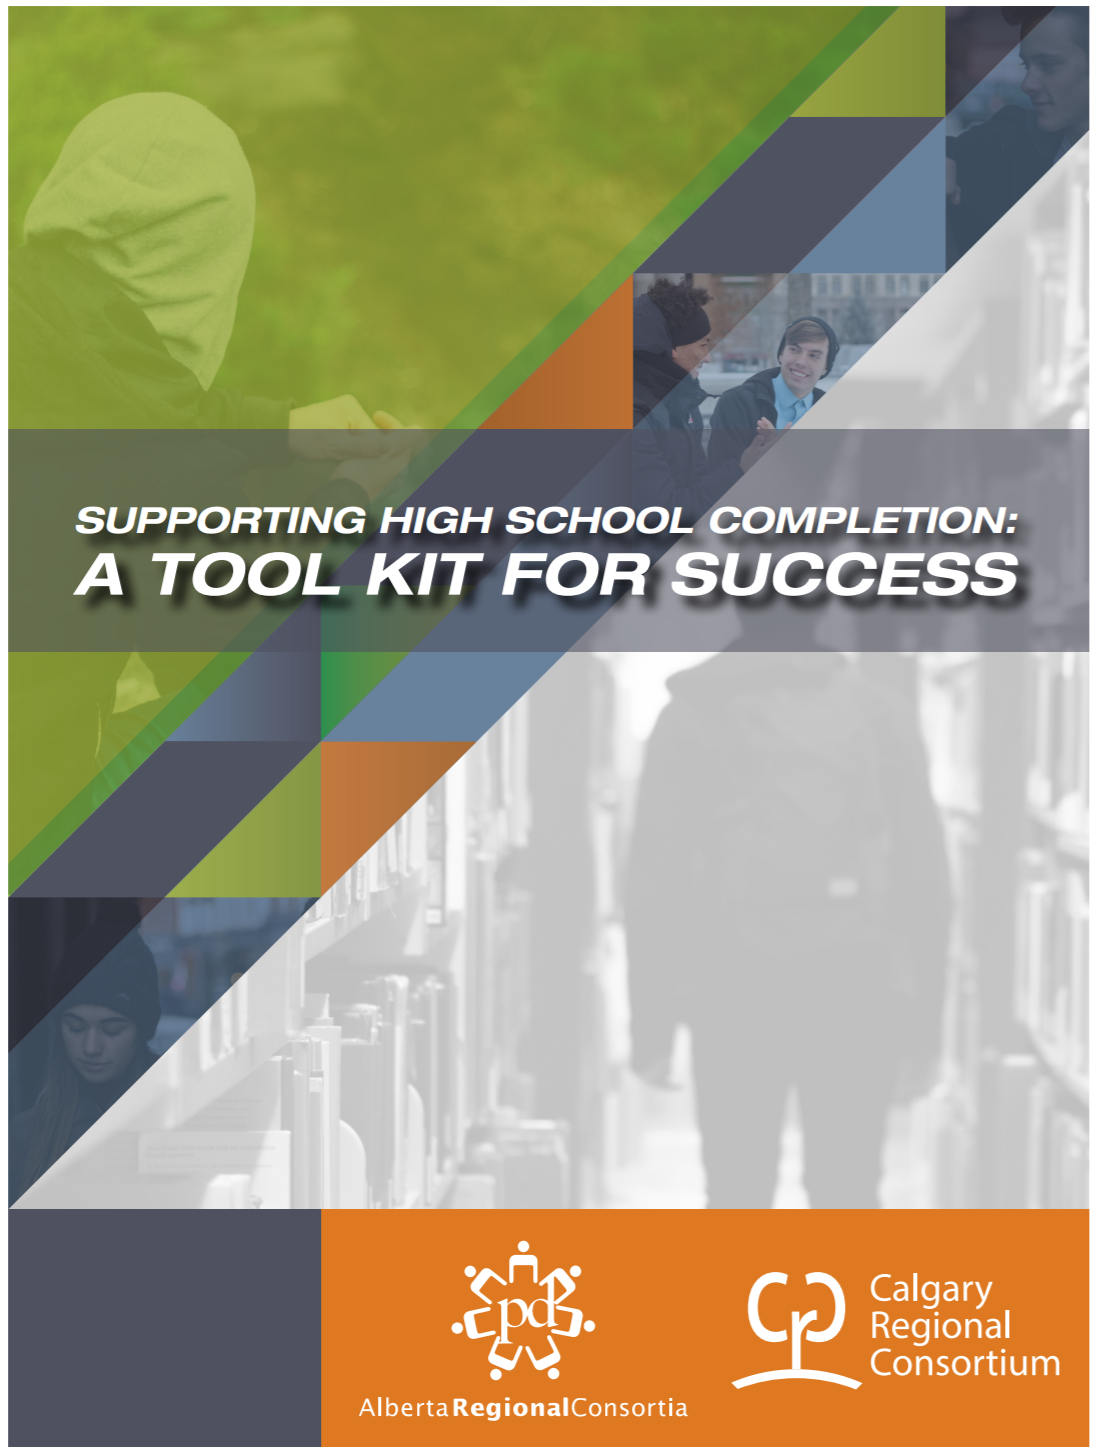 Supporting High School Completion: A Tool Kit for Success